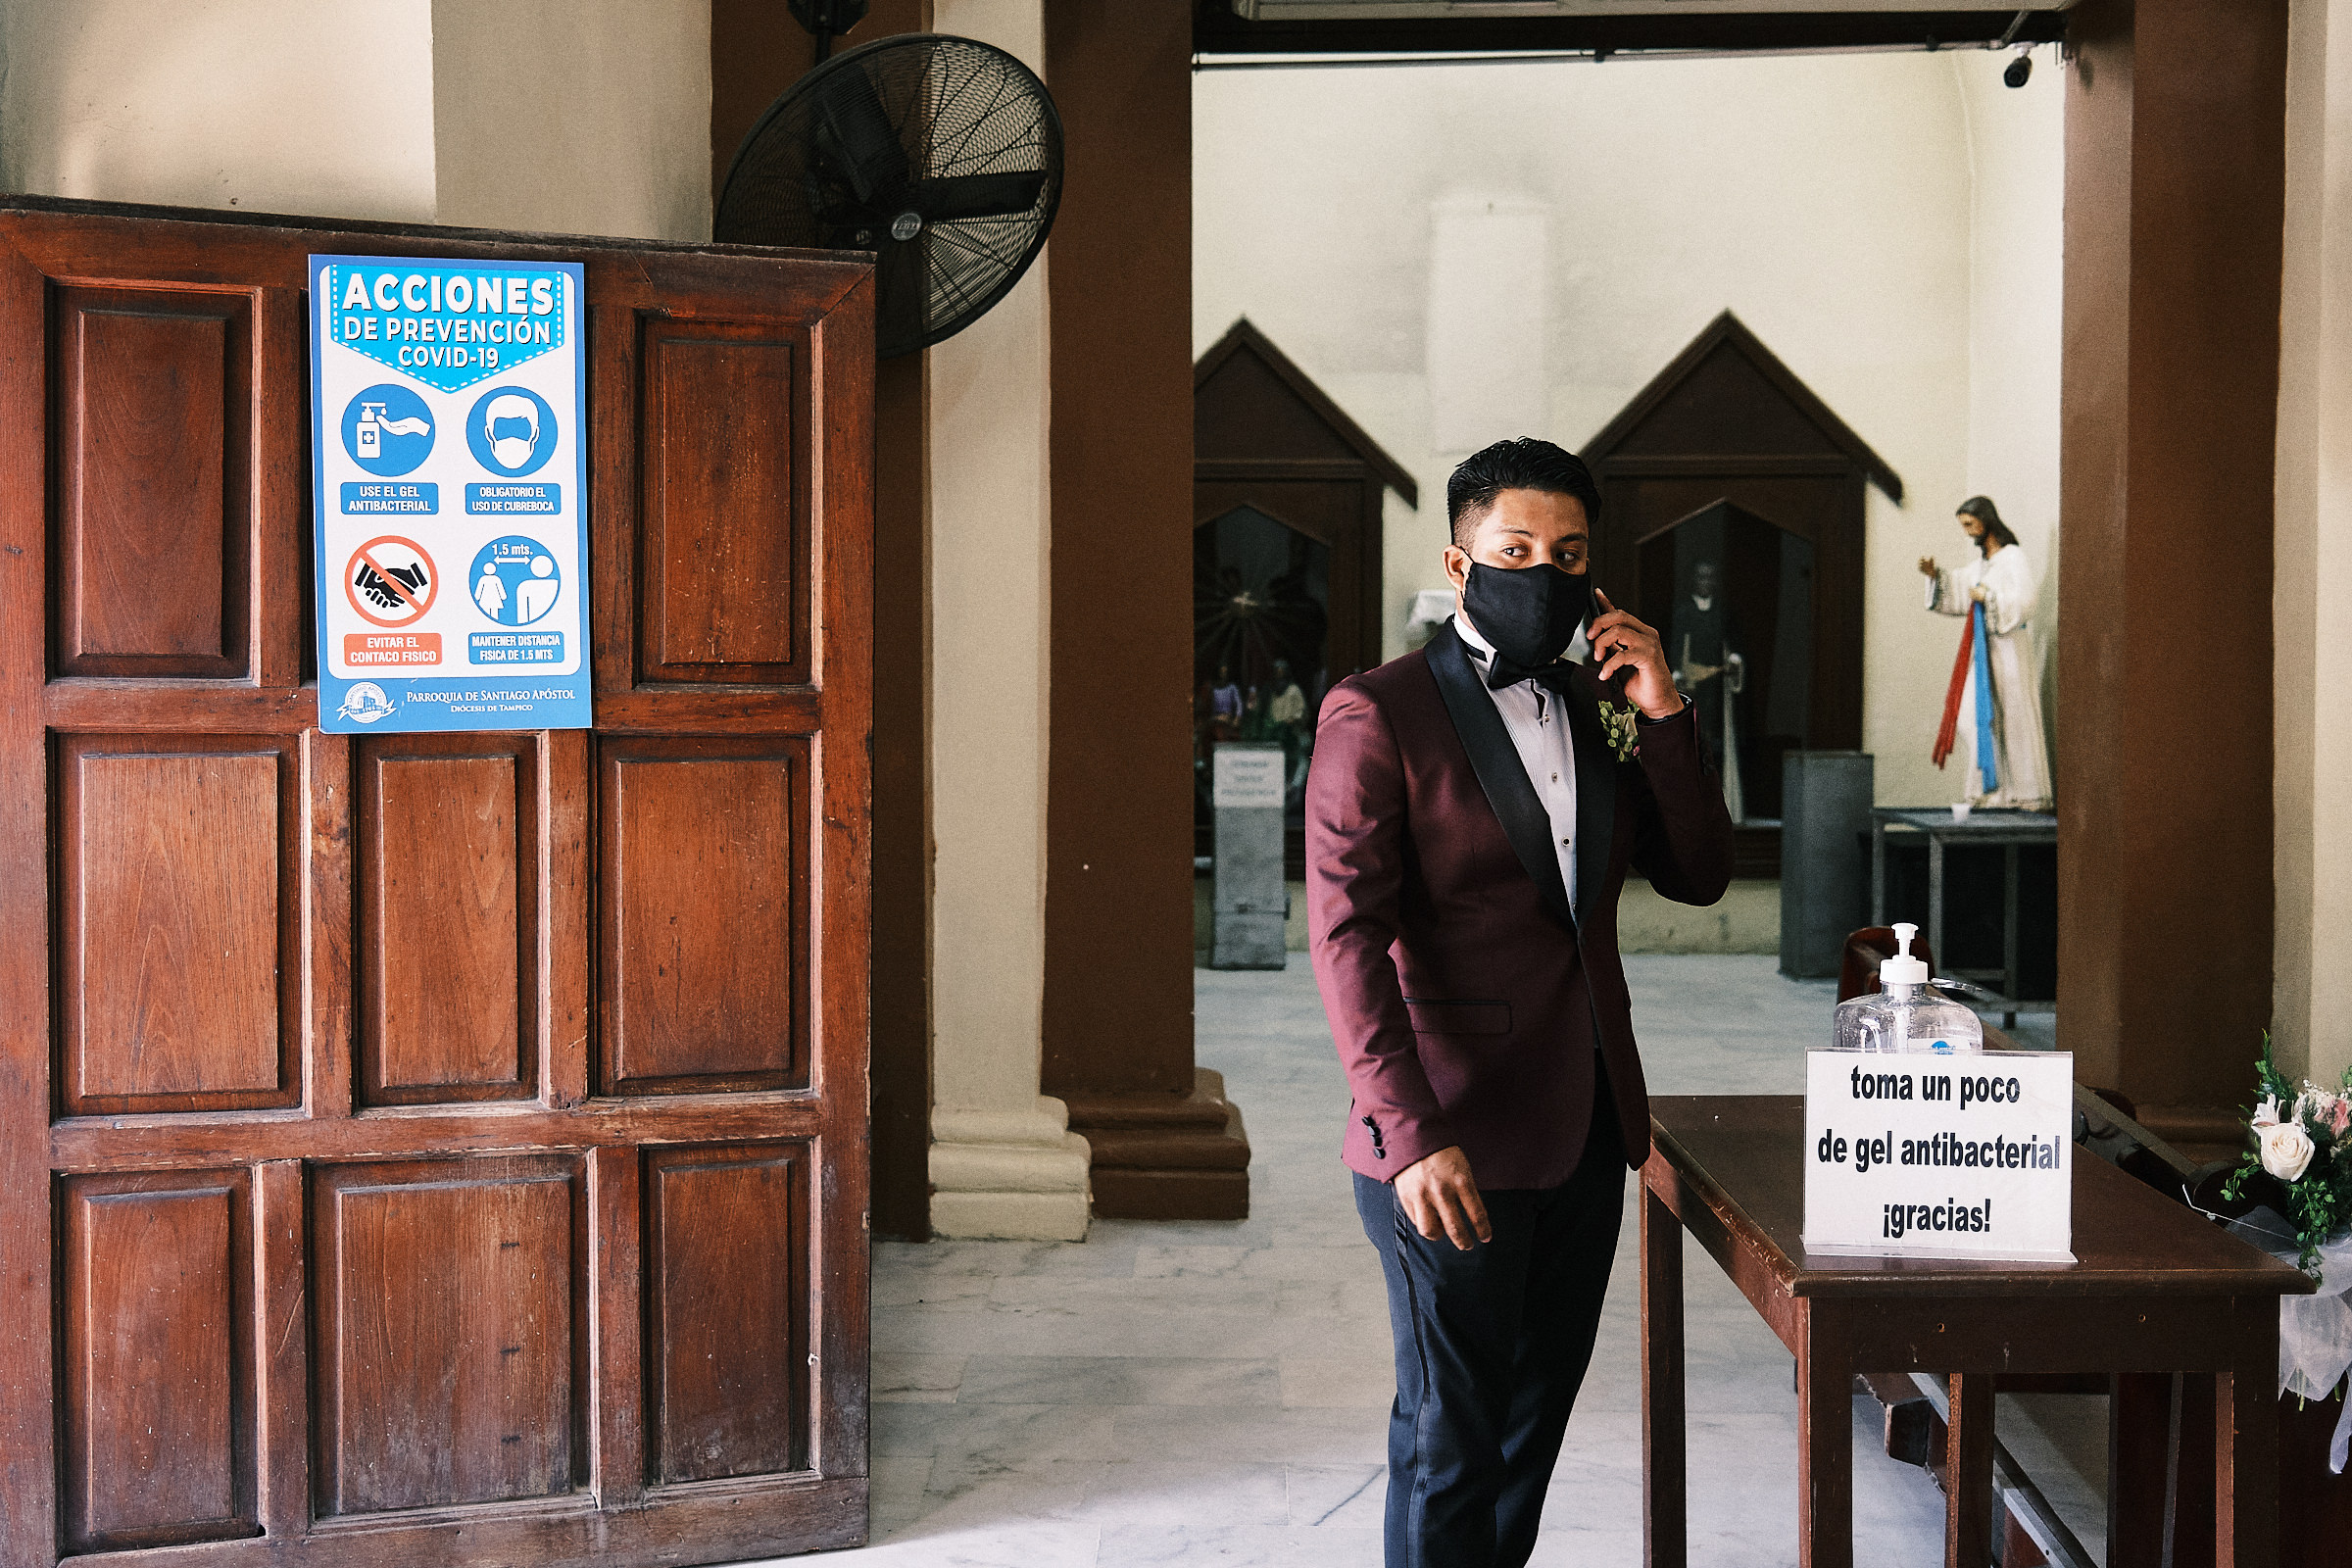 Masked Groom Calls On The Phone And Waits For The Bride To Arrive For Ceremony At The Cathedral